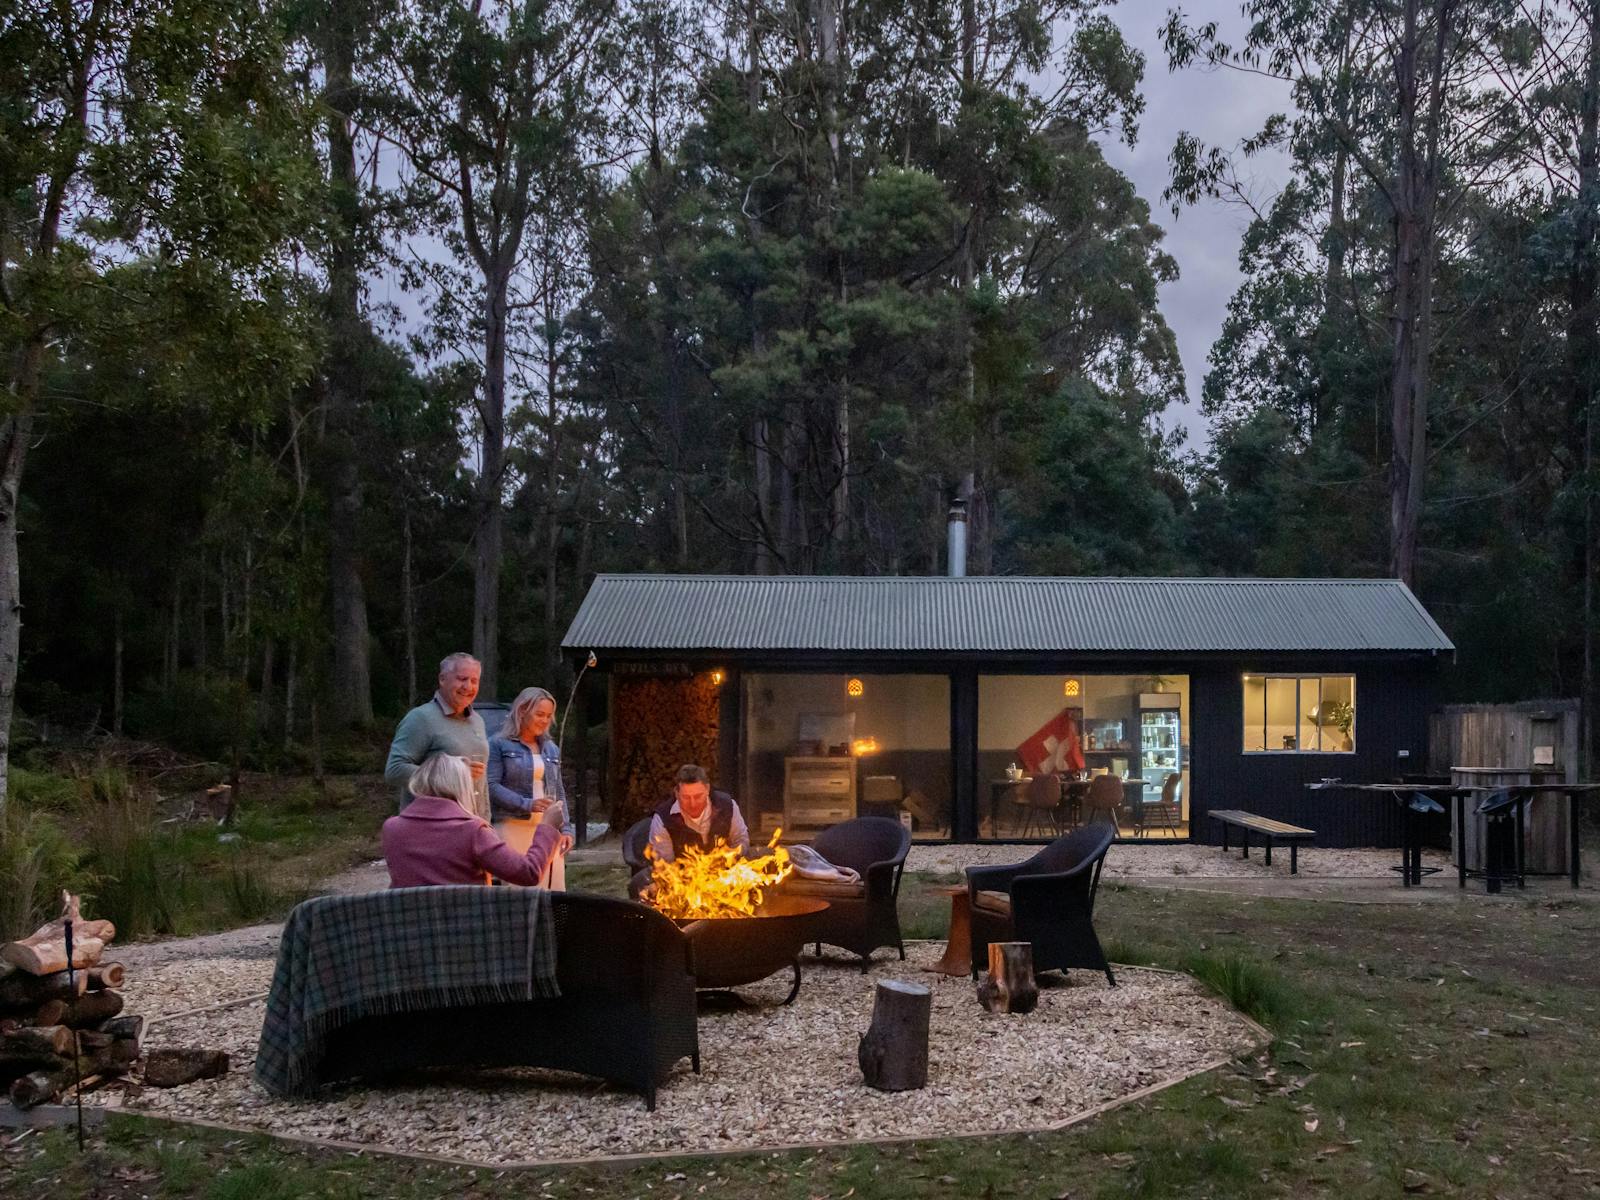 Our "Devils Den" is the perfect place to listen to old records and roast marshmallows around